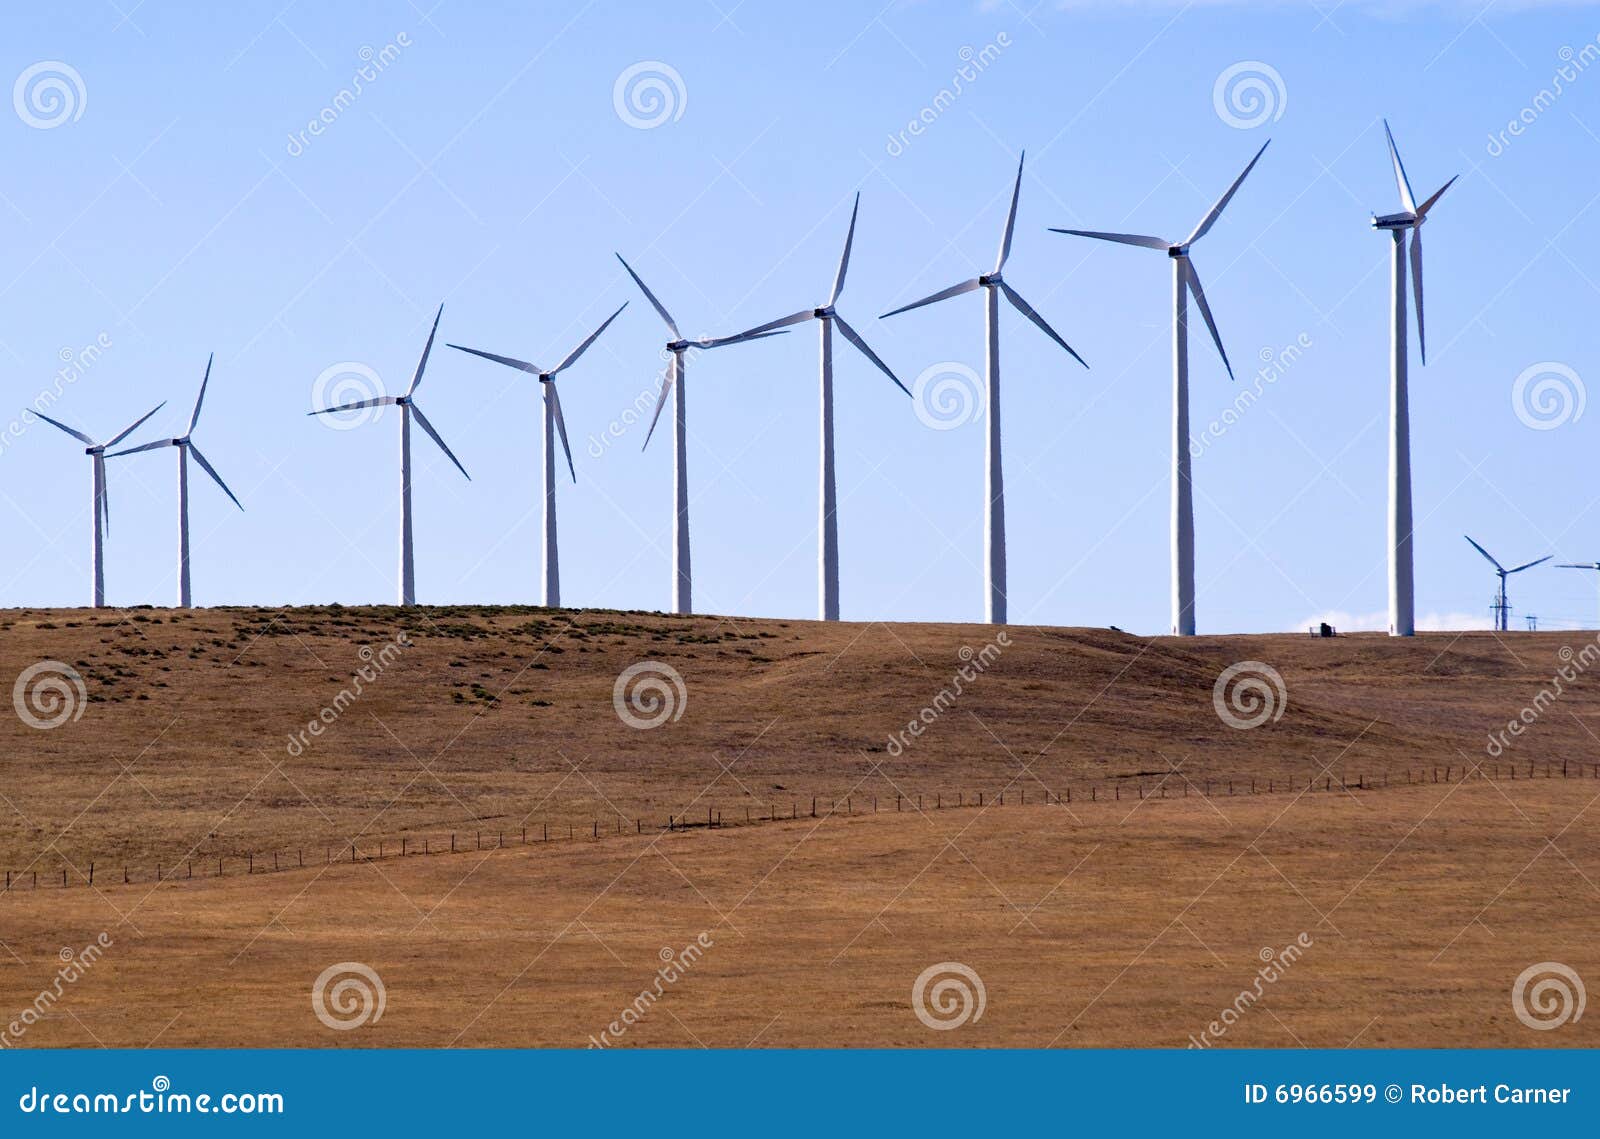 Wind Turbines Making Electricity